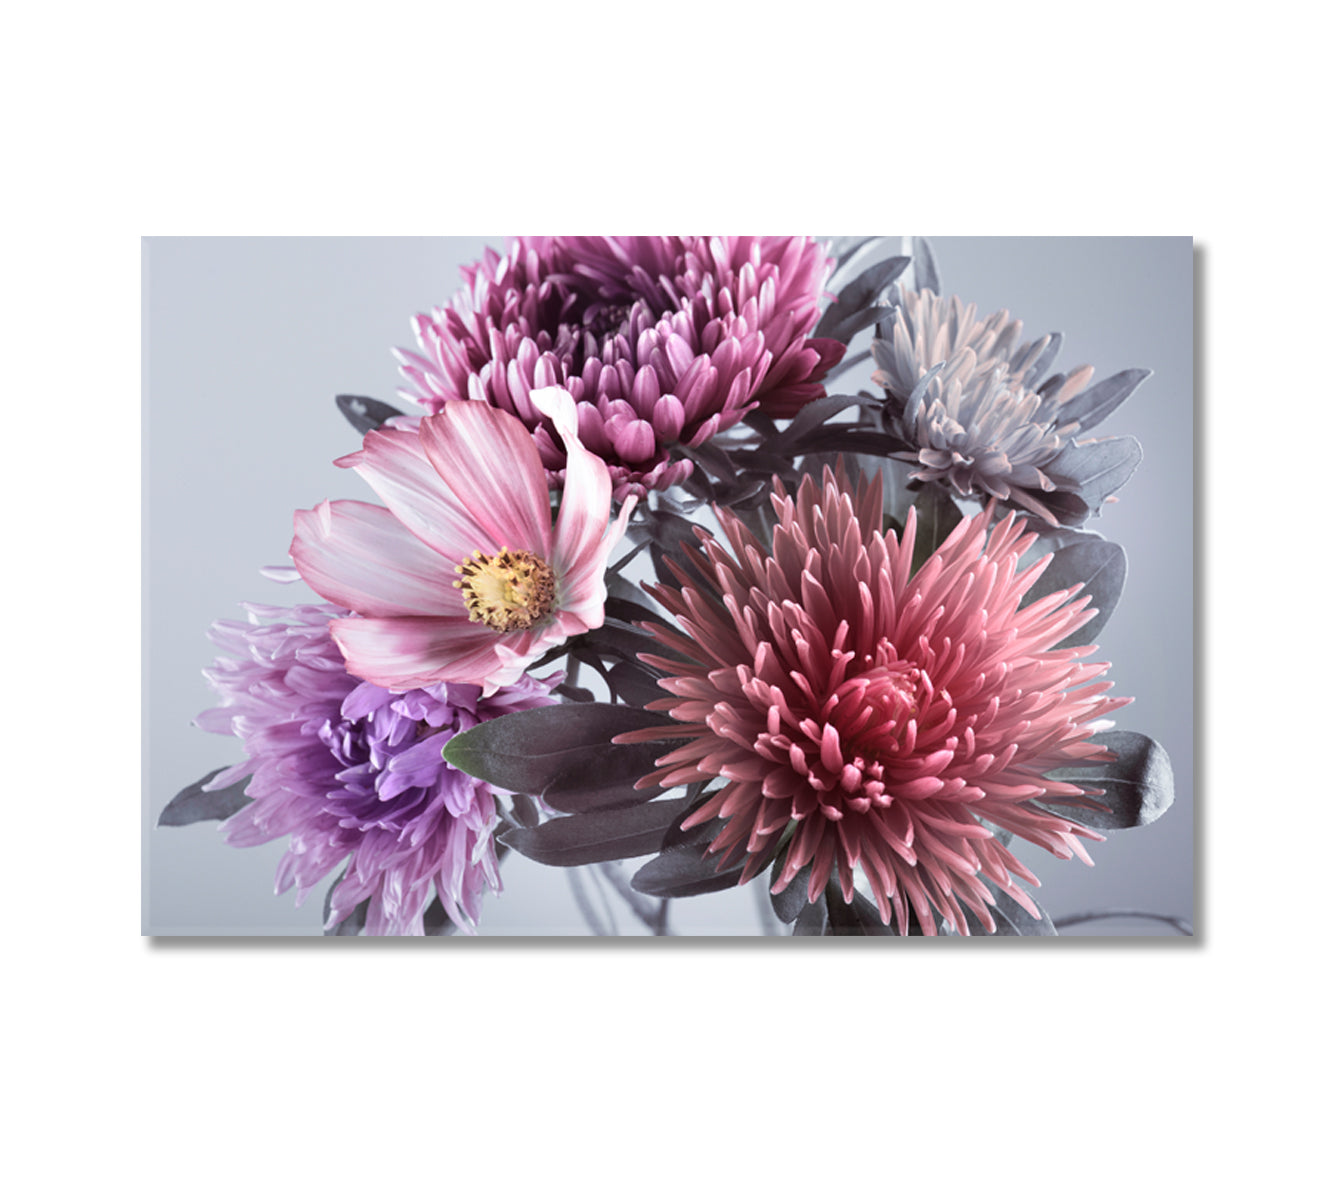 Purple Asters Flowers Art For Home-Canvas Print-CetArt-1 Panel-24x16 inches-CetArt